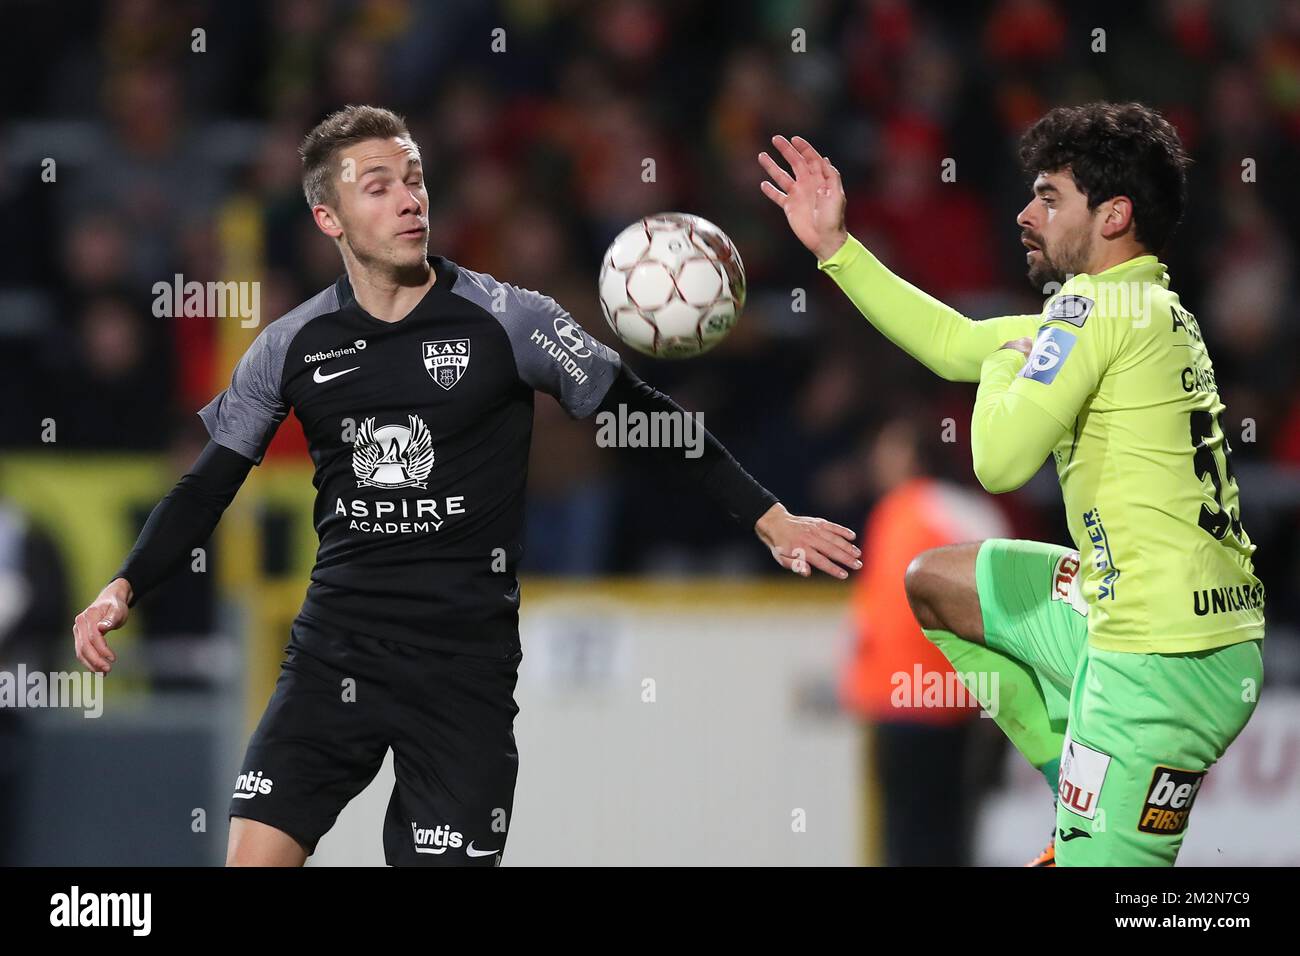 Eupen's Nils Schouterden and Oostende's Fernando Canesin fight for the ball during a soccer game between KAS Eupen and KV Oostende, Wednesday 19 December 2018 in Eupen, in the quarter-finals of the 'Croky Cup' Belgian cup. BELGA PHOTO BRUNO FAHY Stock Photo